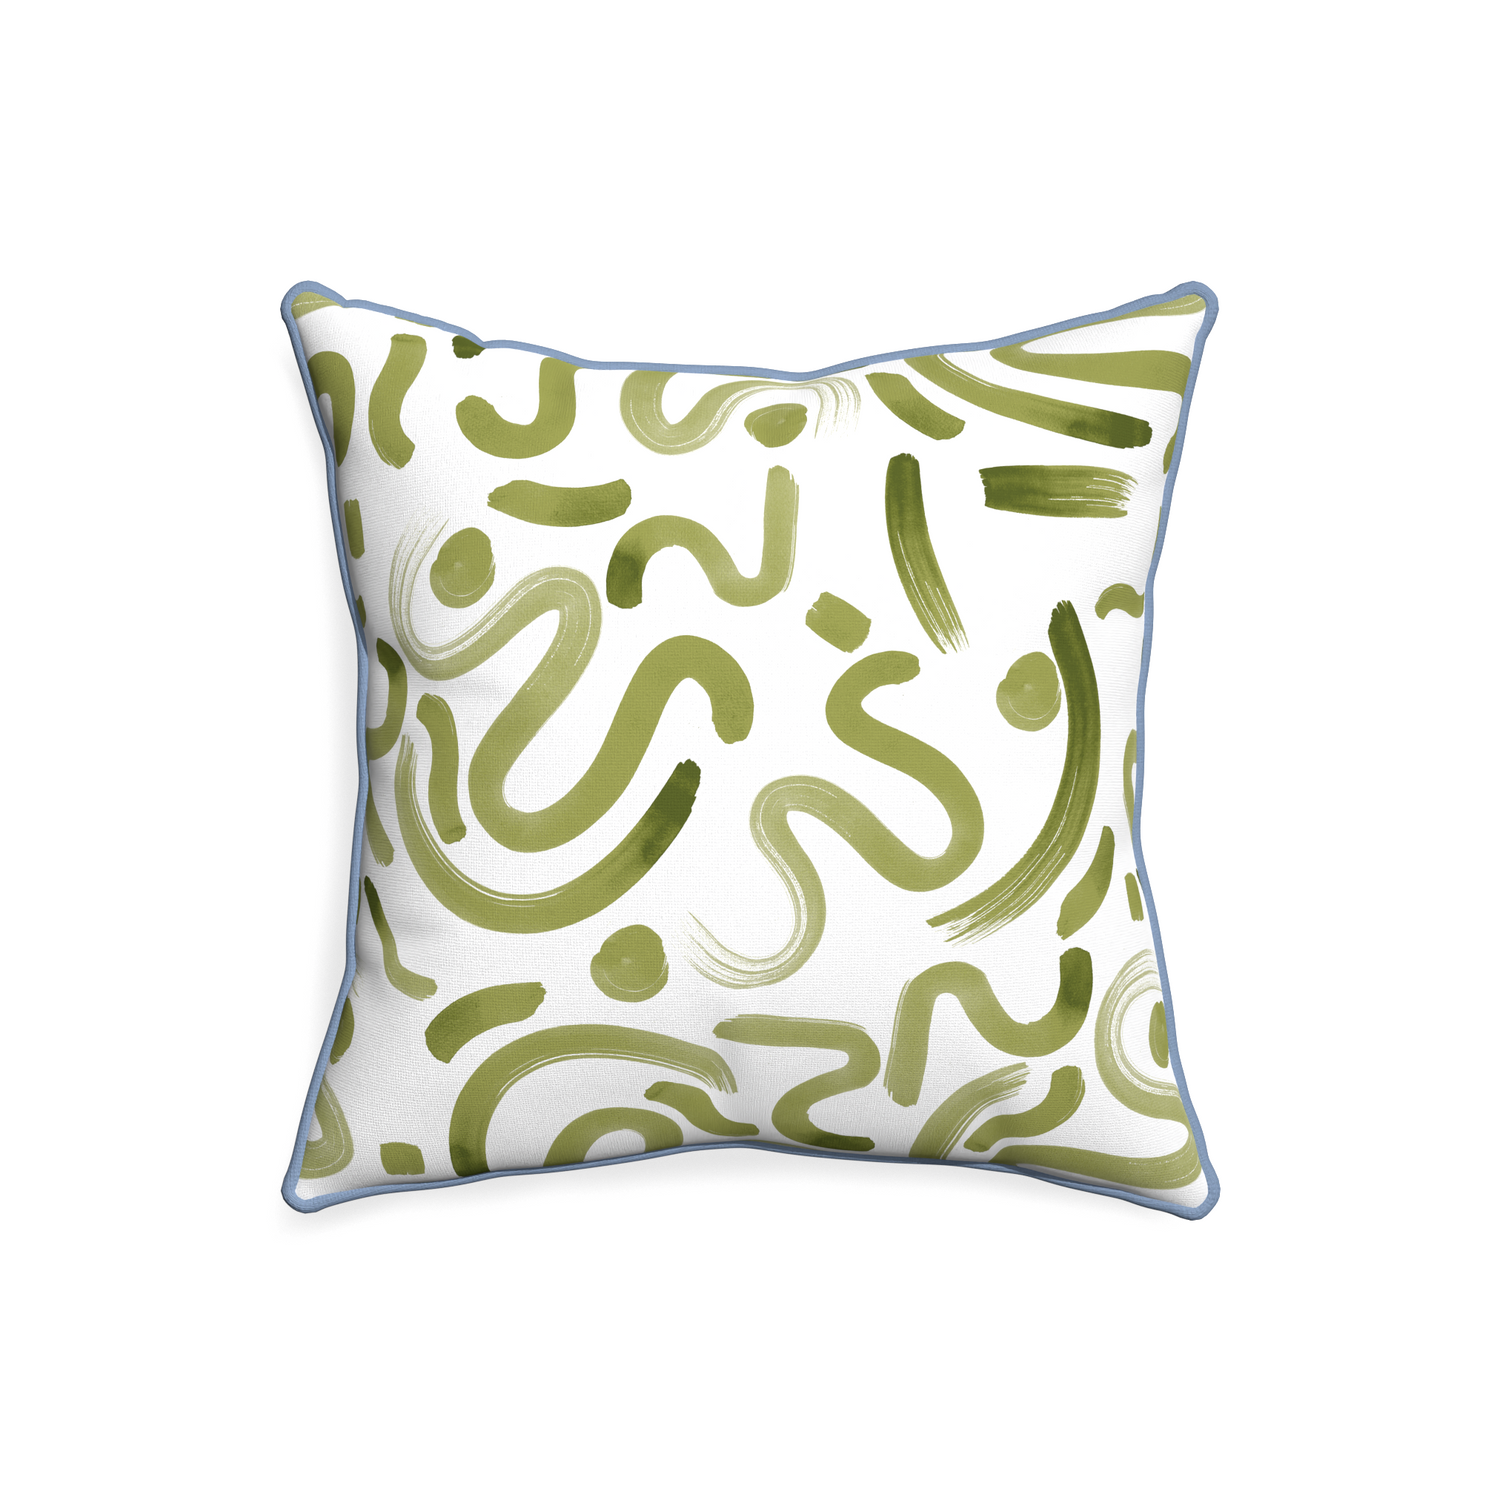 20-square hockney moss custom moss greenpillow with sky piping on white background